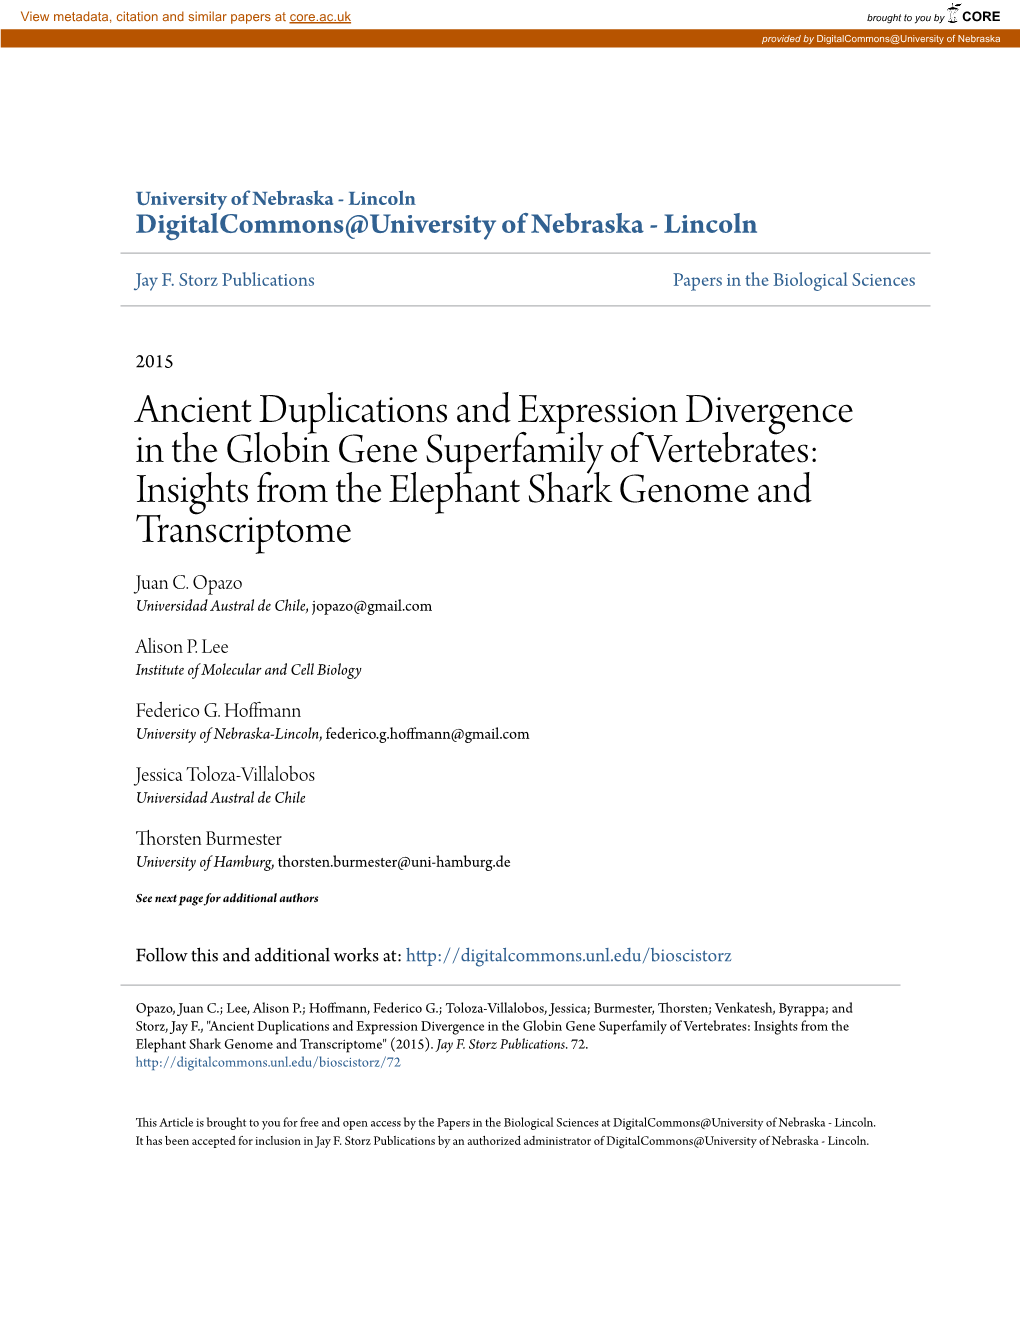 Ancient Duplications and Expression Divergence in the Globin Gene Superfamily of Vertebrates: Insights from the Elephant Shark Genome and Transcriptome Juan C